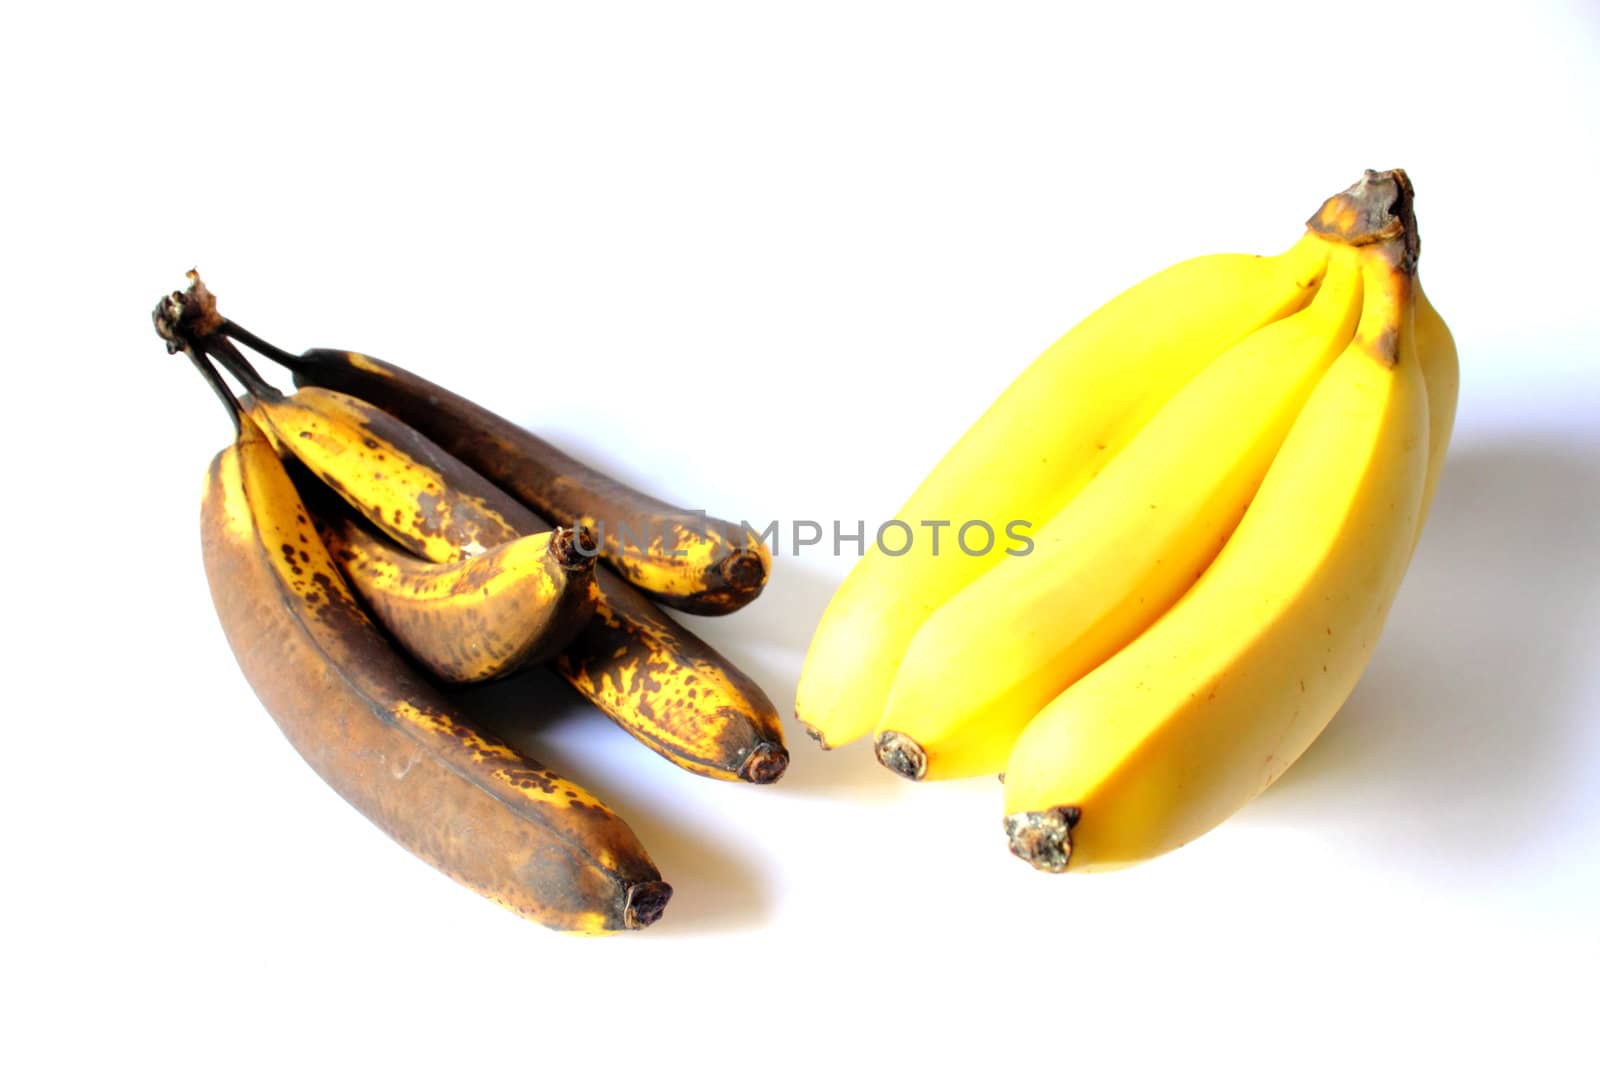 Ripe and Unripe Bananas by abhbah05